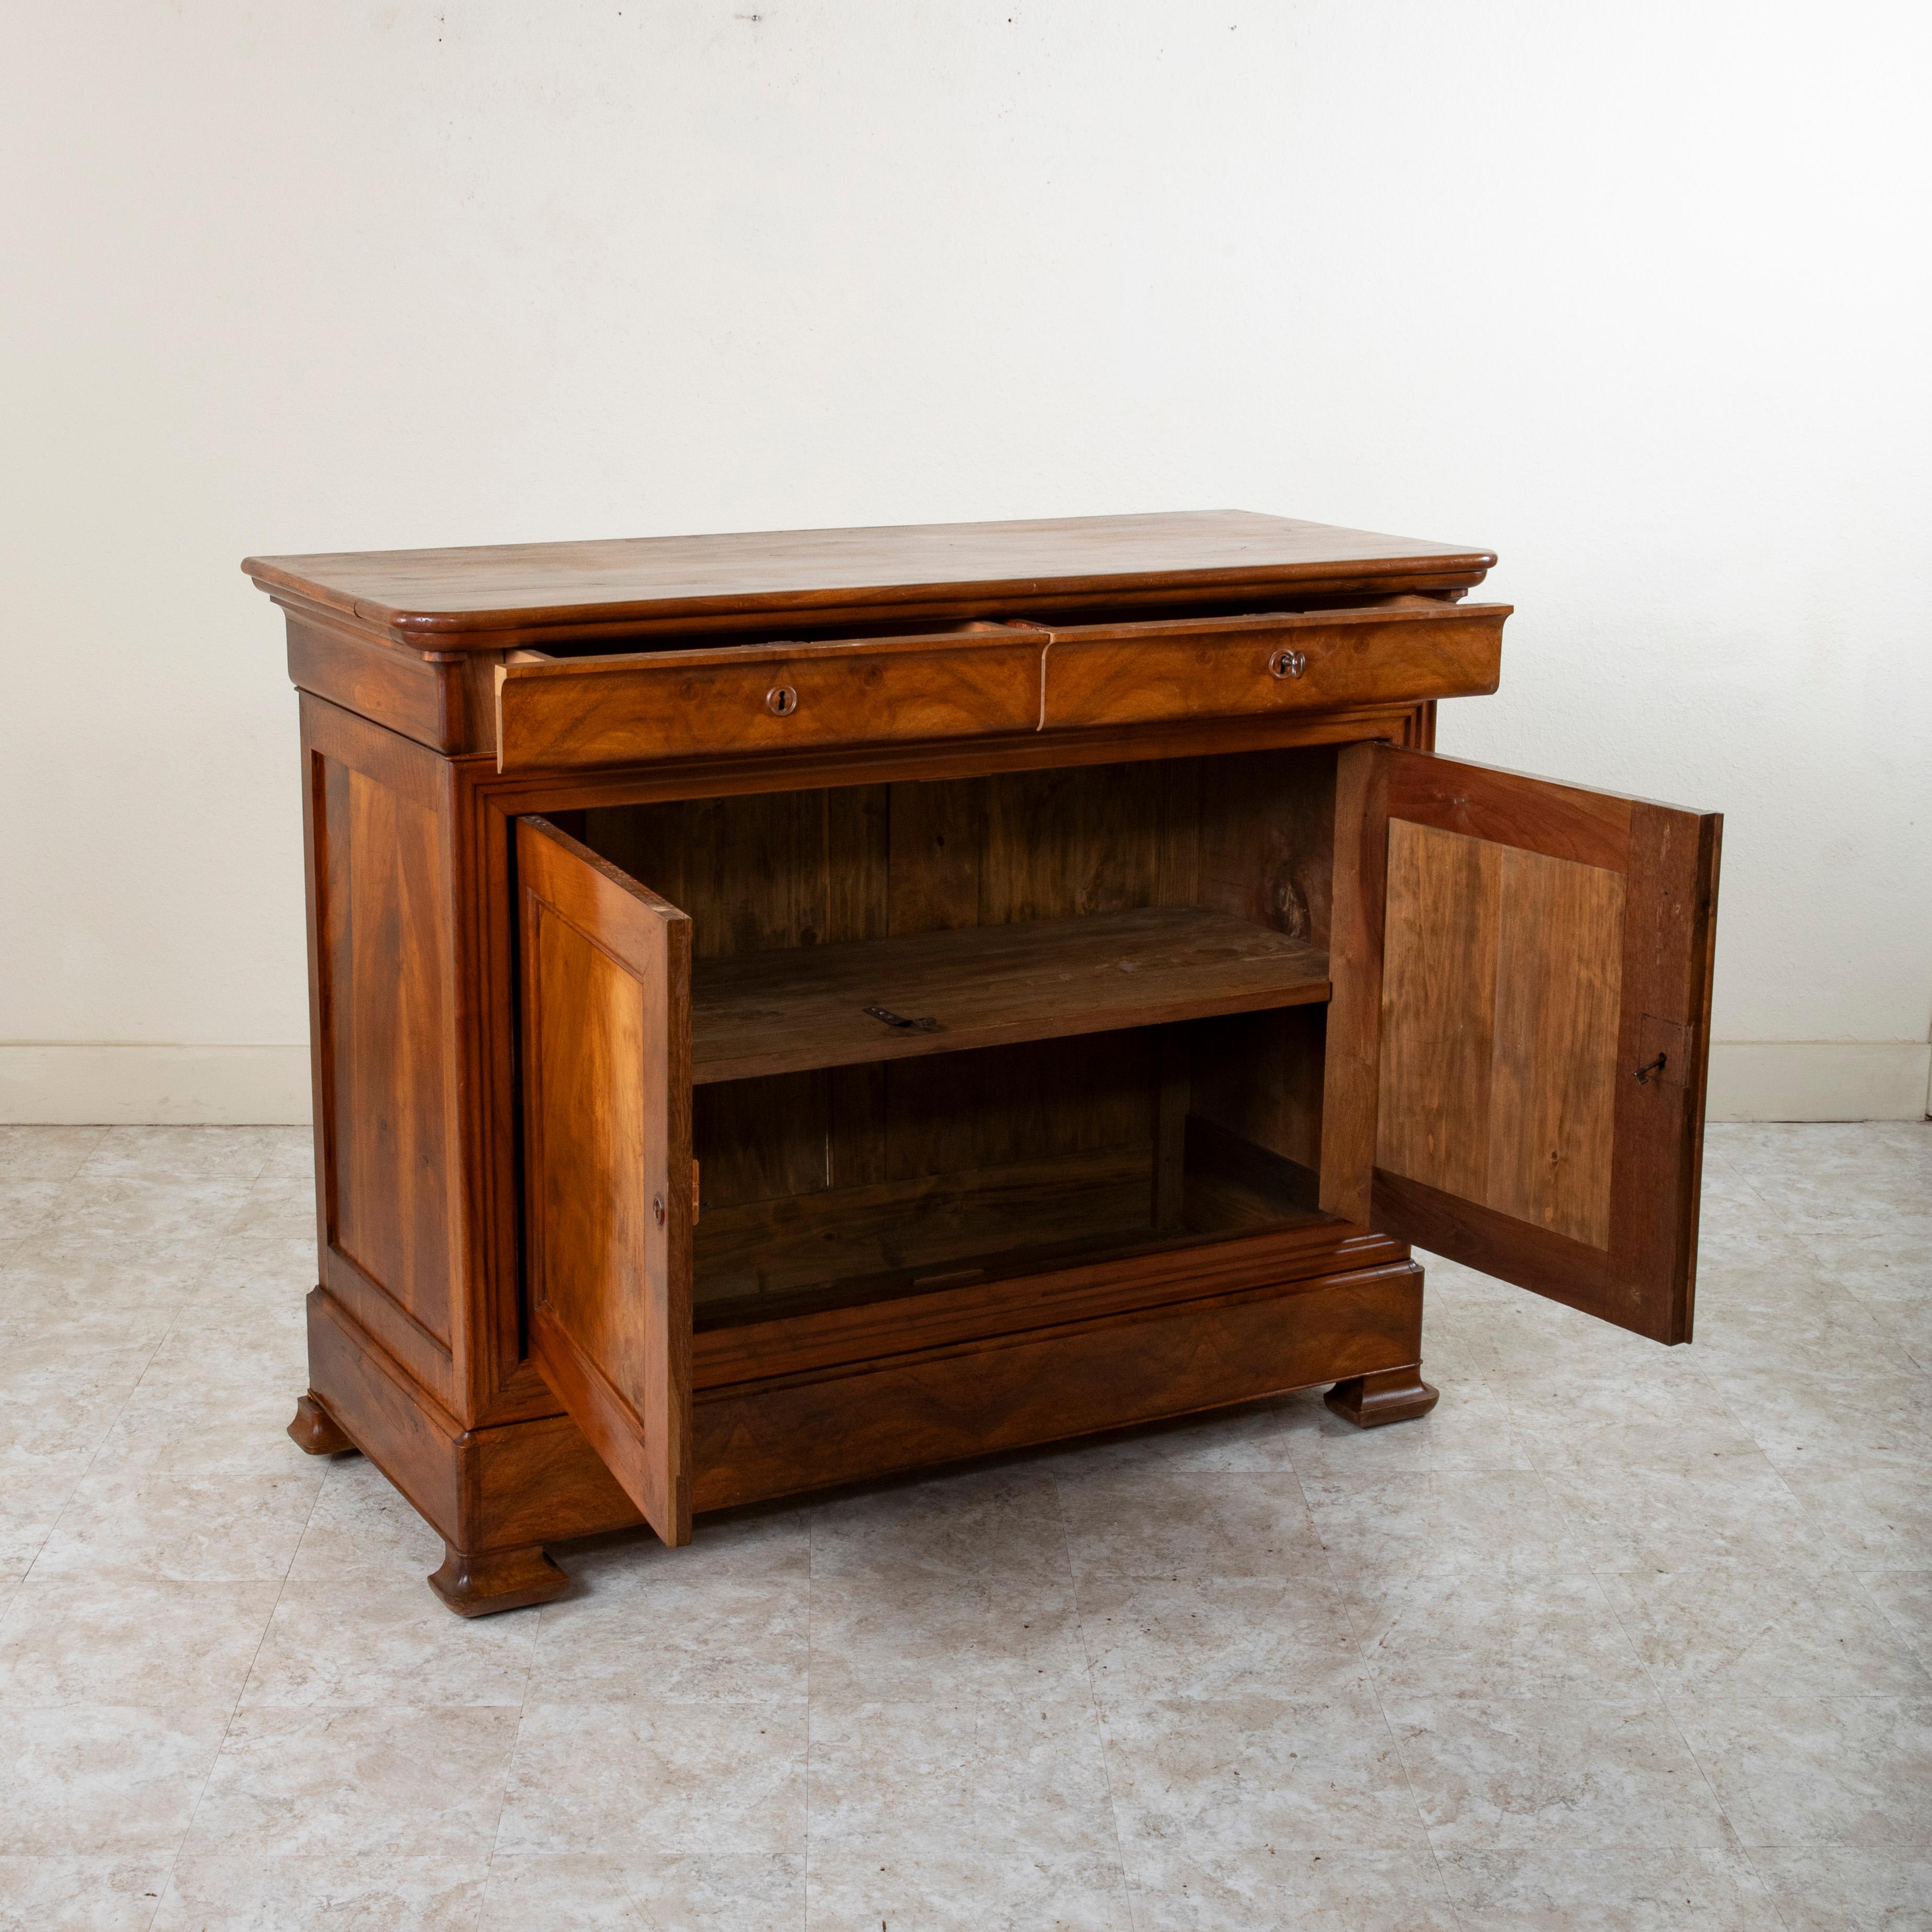 Tall Mid-19th Century French Louis Philippe Period Walnut Buffet or Sideboard For Sale 4